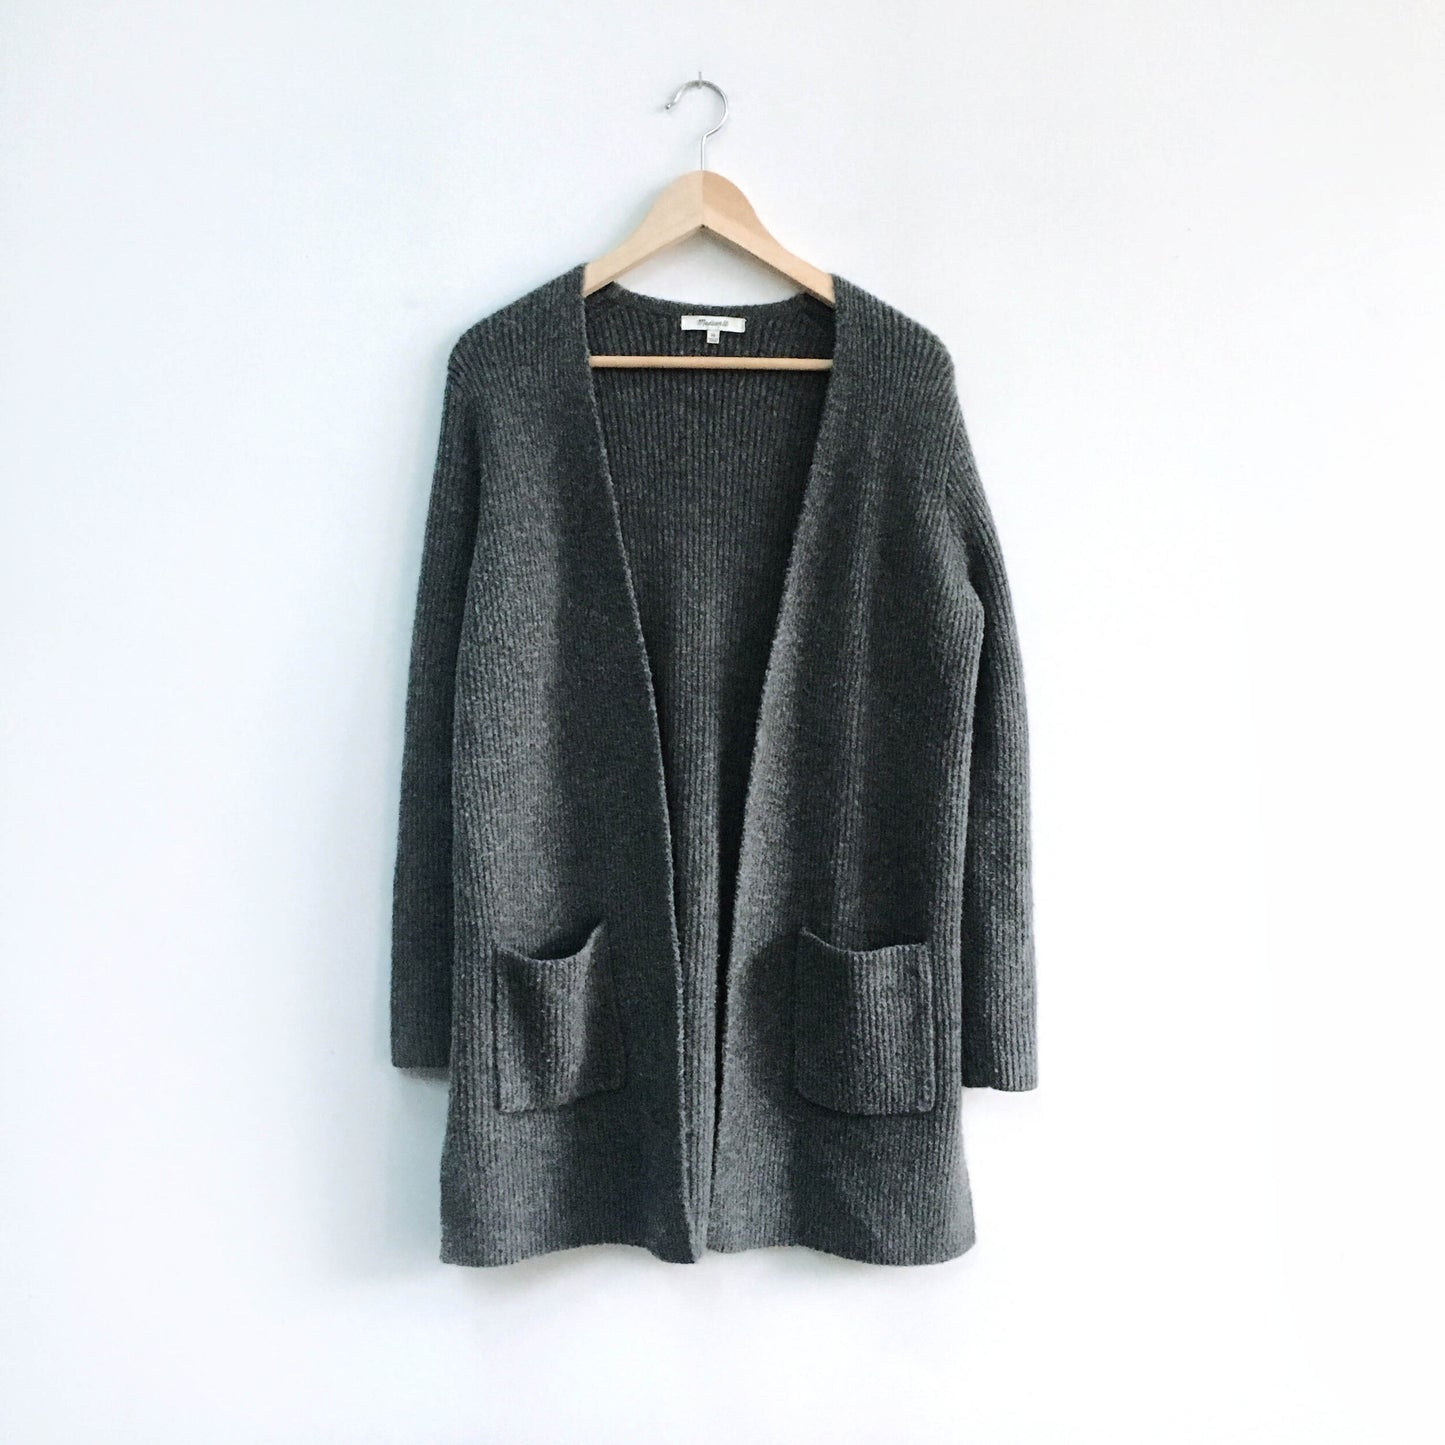 Madewell Dylan Cardigan - size xs